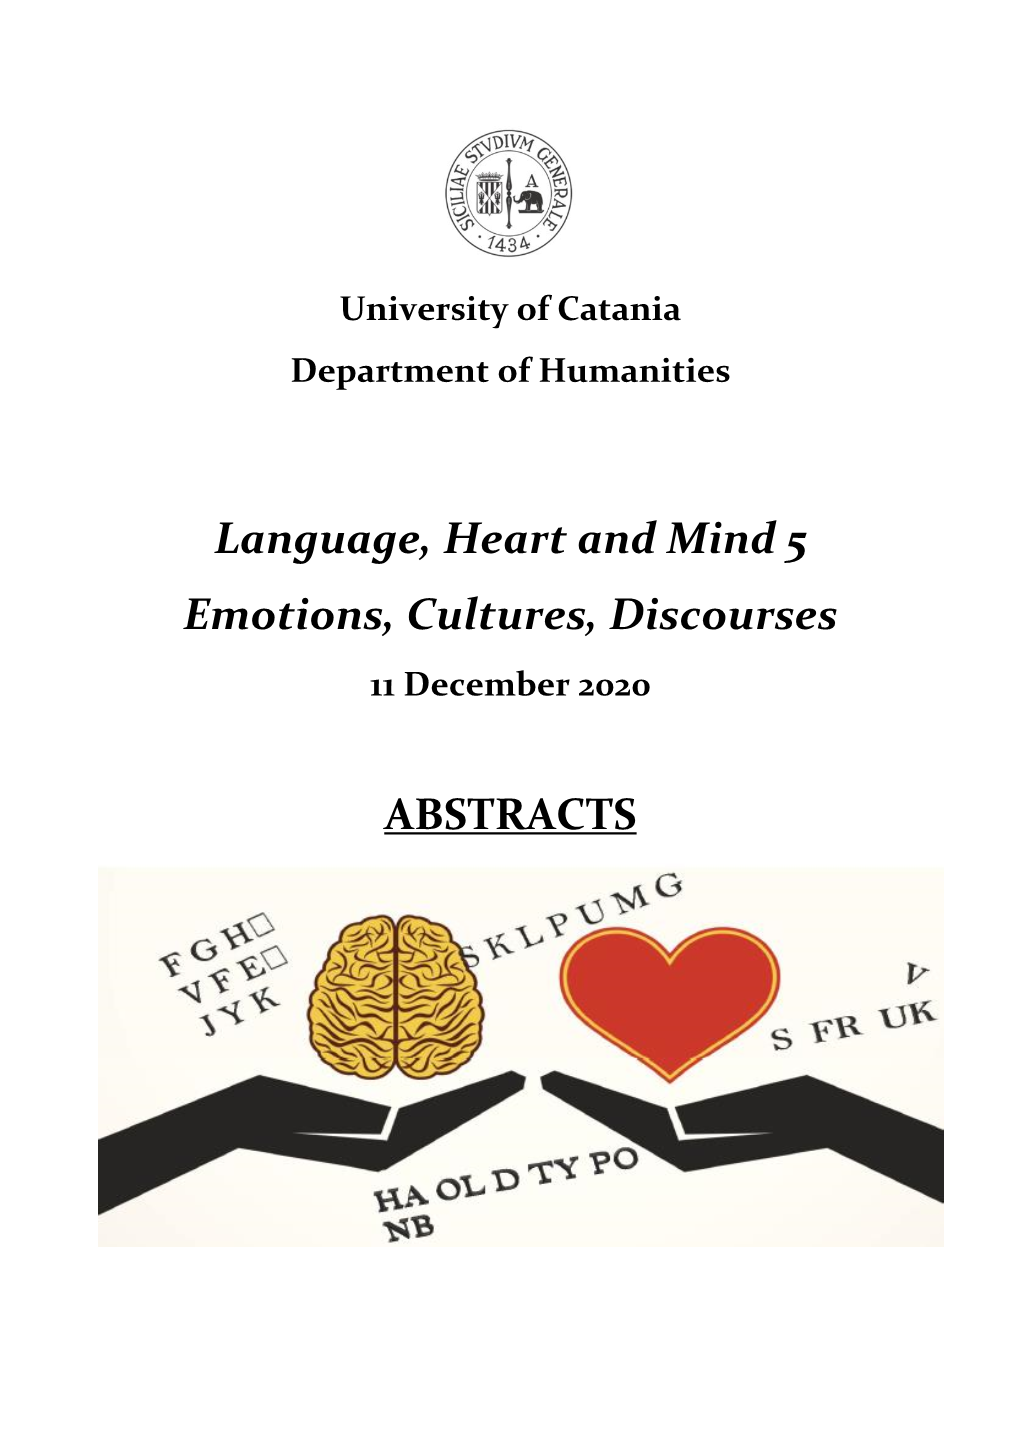 Language, Heart and Mind 5 Emotions, Cultures, Discourses ABSTRACTS